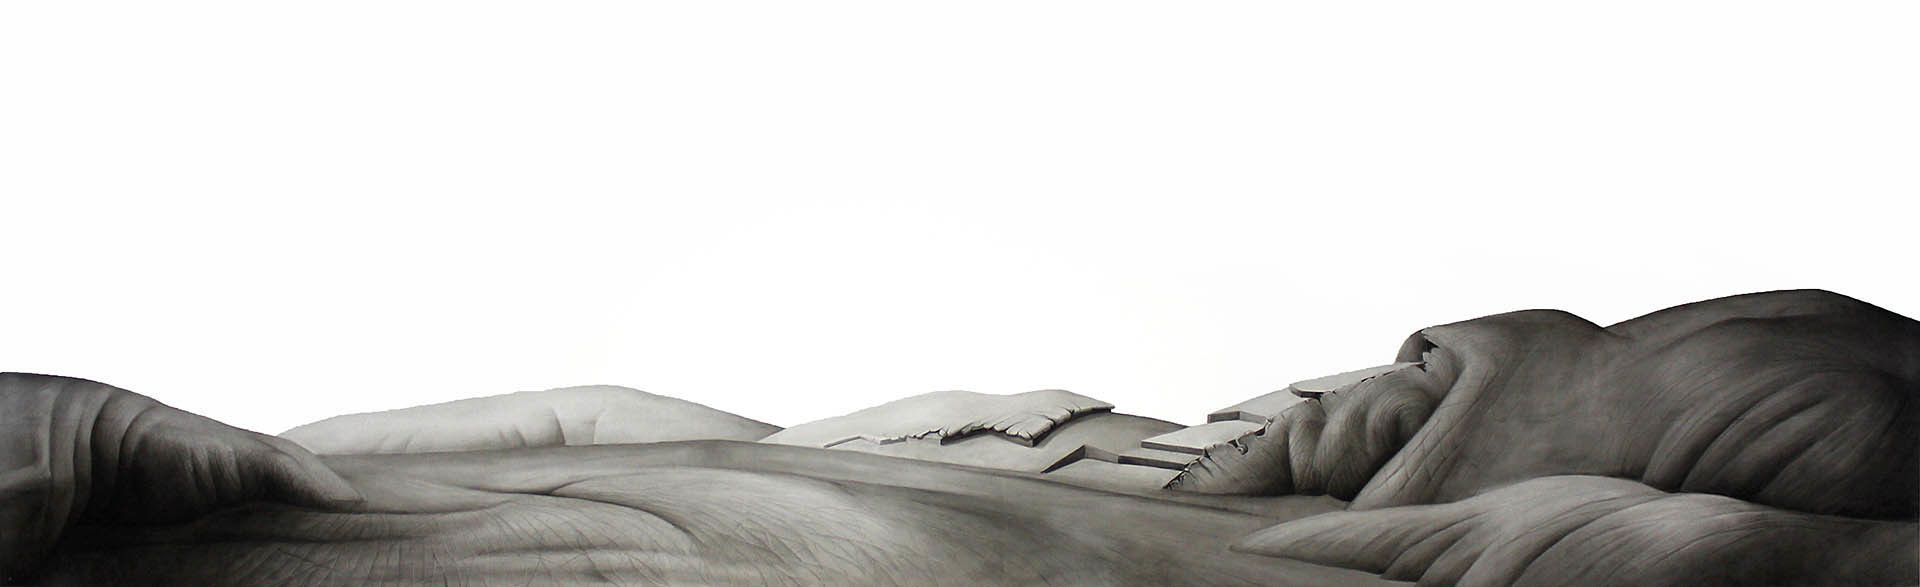 drawing of altered landscape with features resembling human hand